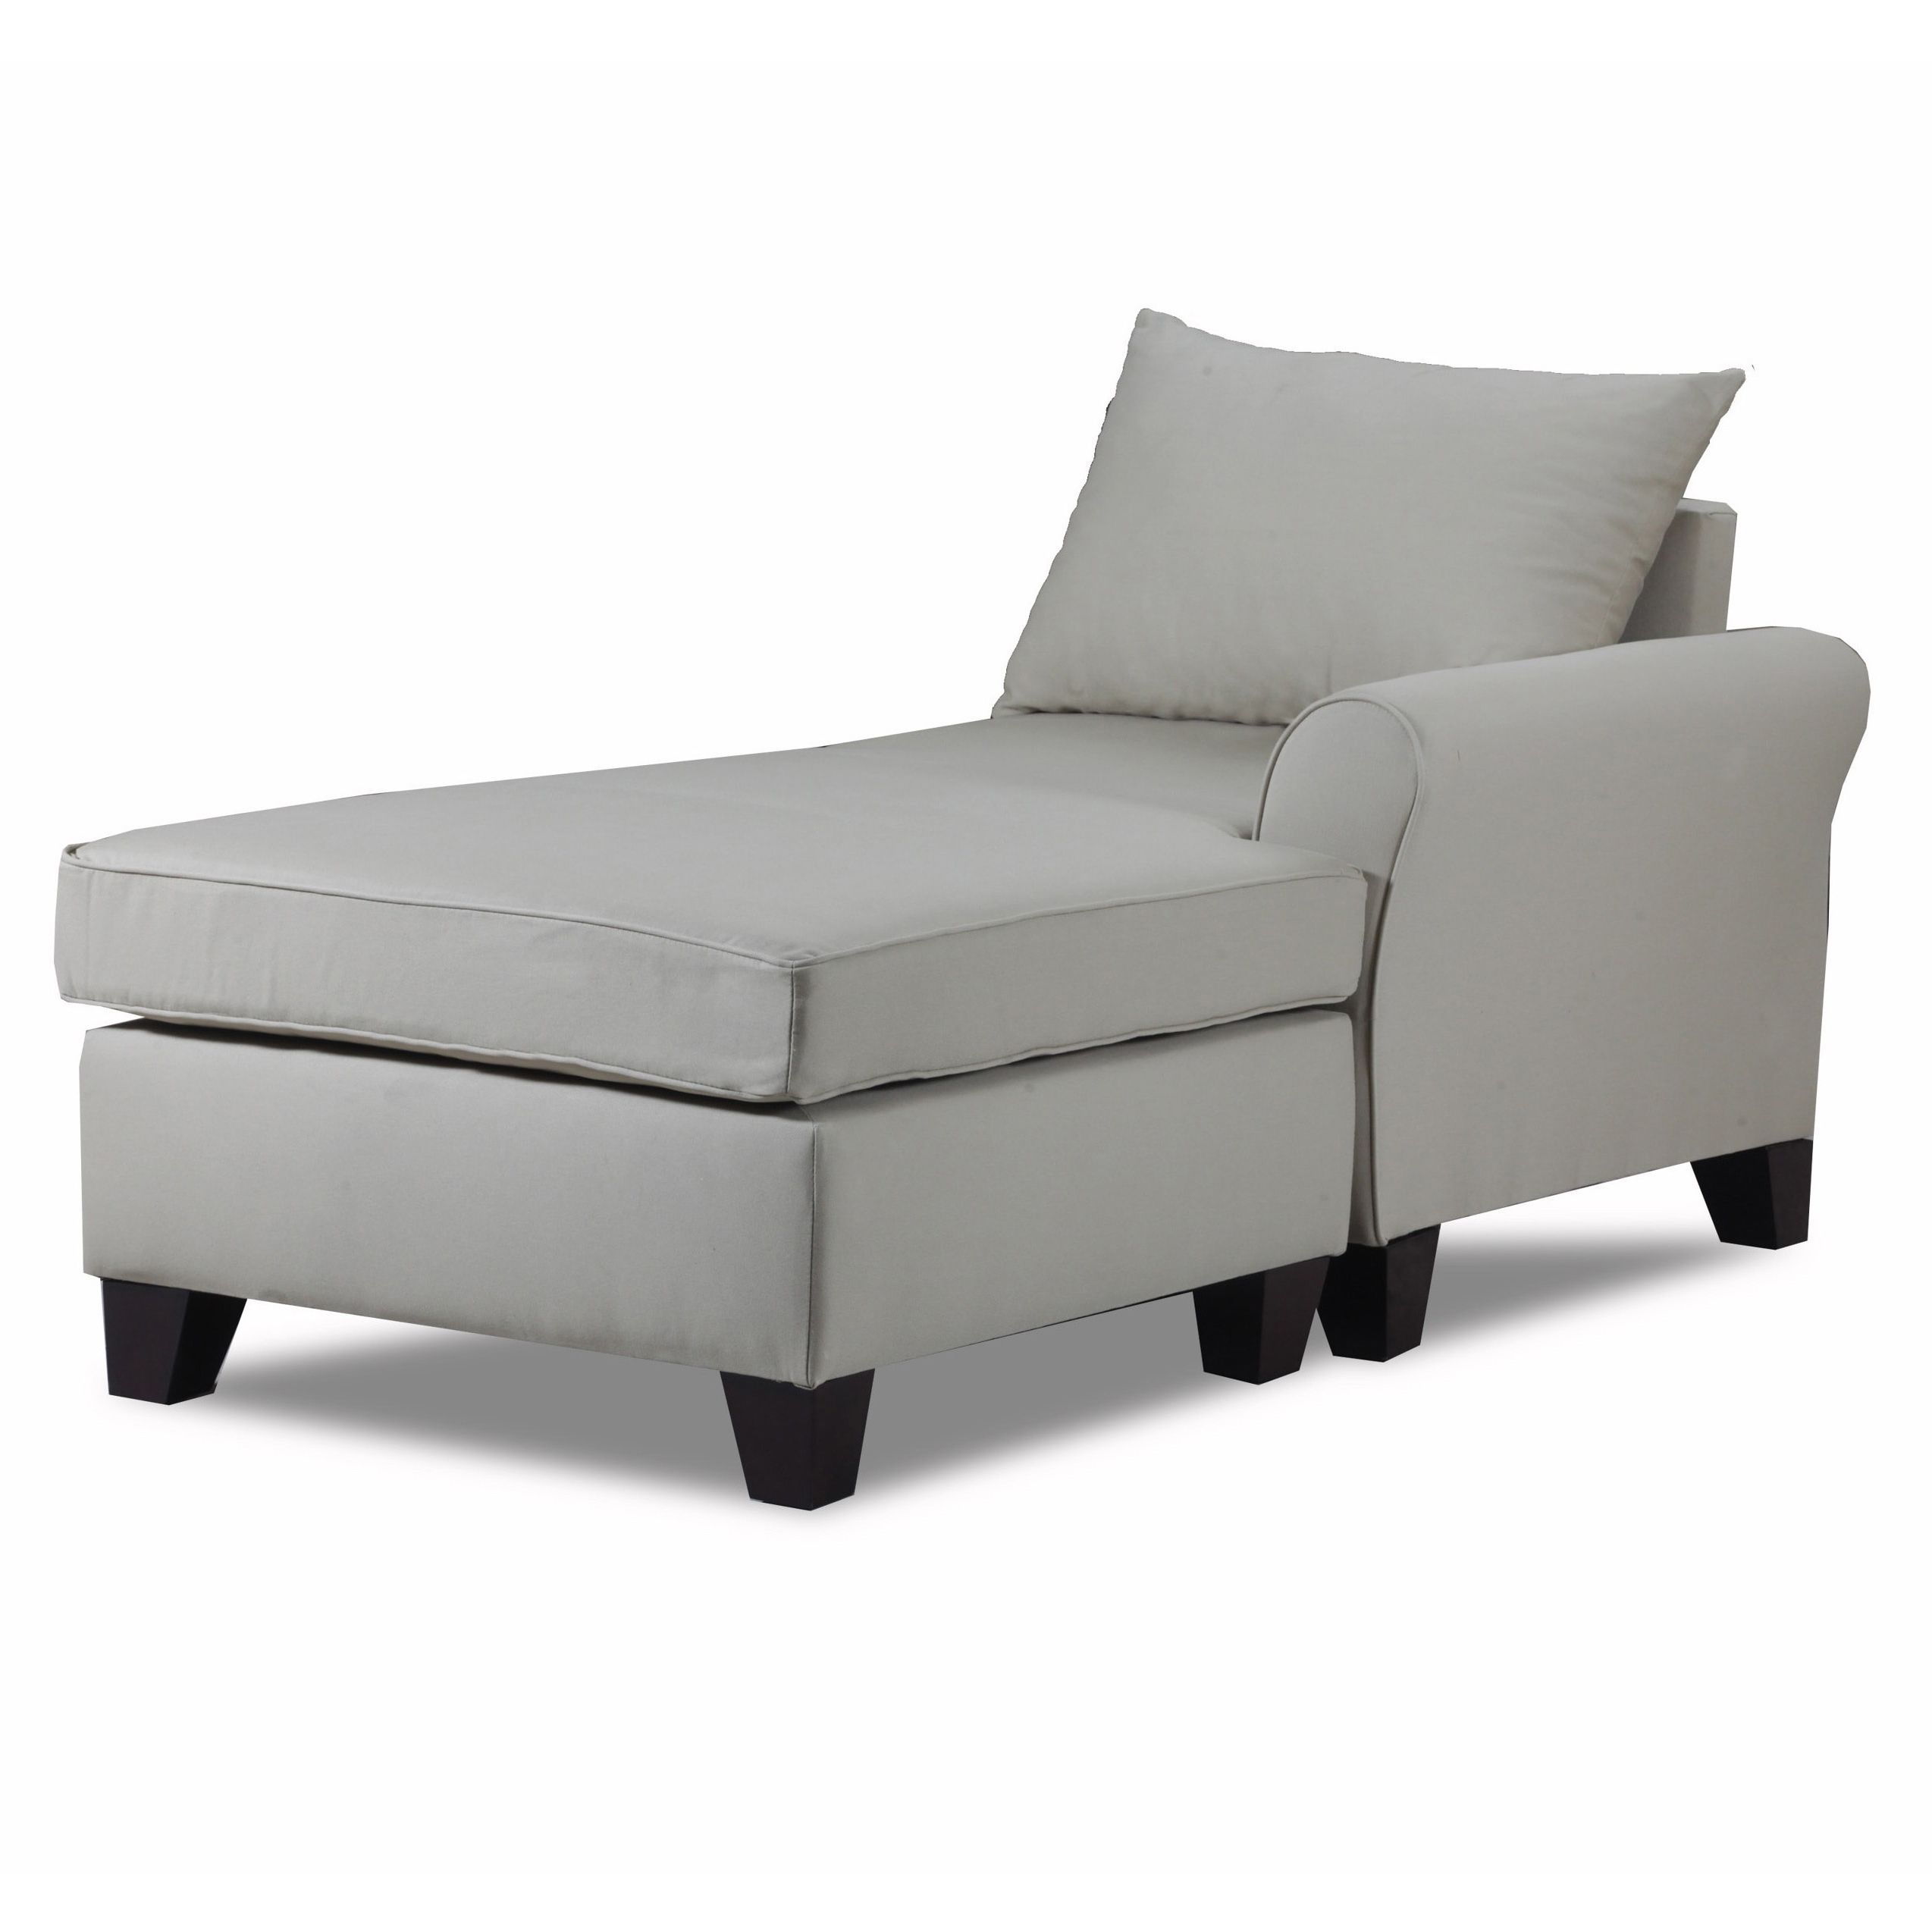 Current Left Arm Chaise Lounges Throughout Belle Meade Left Arm Chaise – Free Shipping Today – Overstock (View 11 of 15)